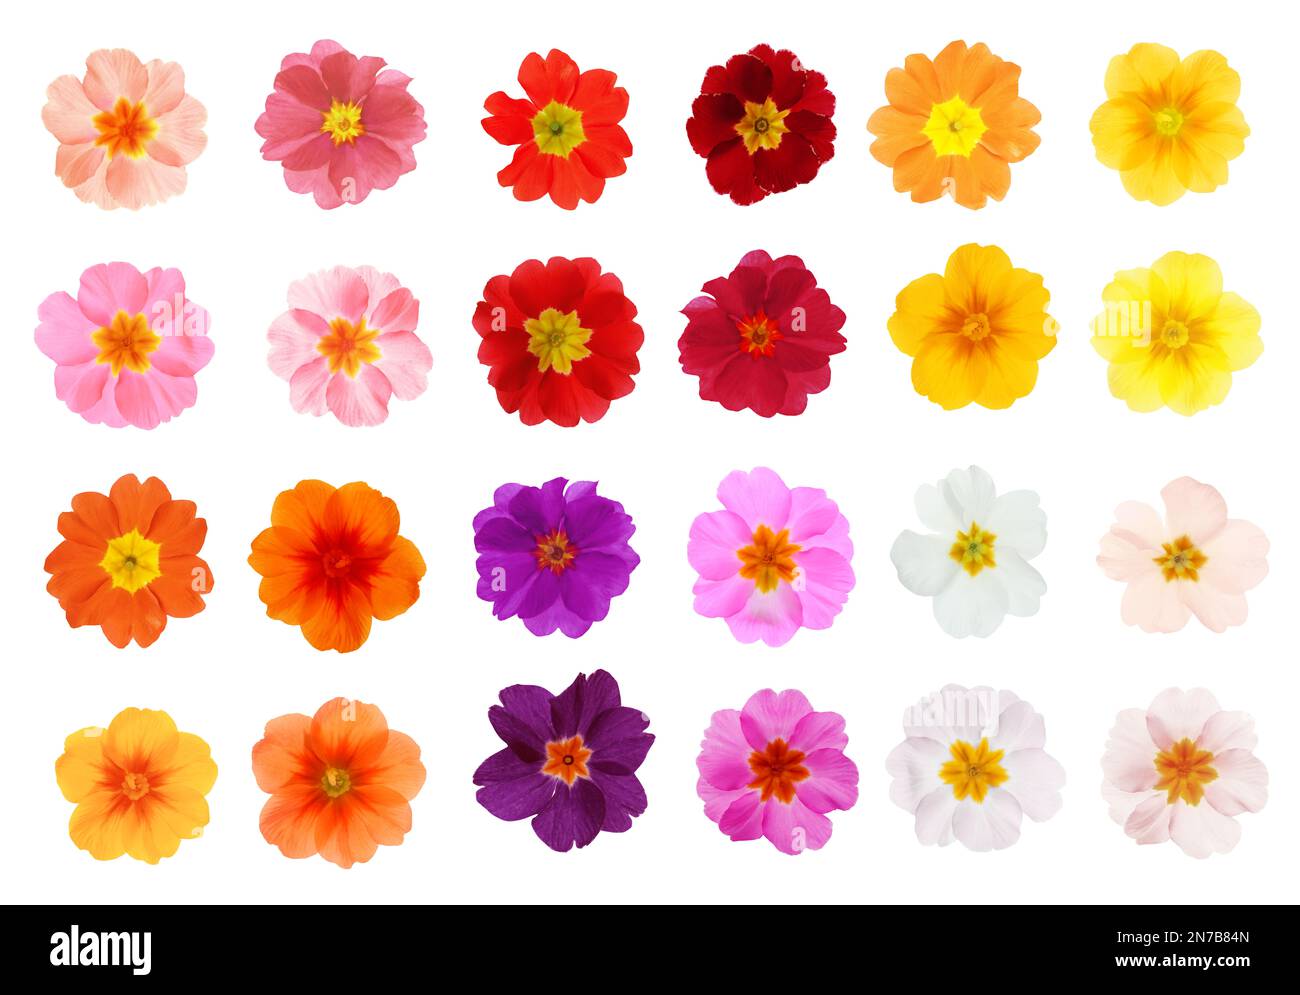 Set with different beautiful primula (primrose) flowers on white background. Spring blossom Stock Photo